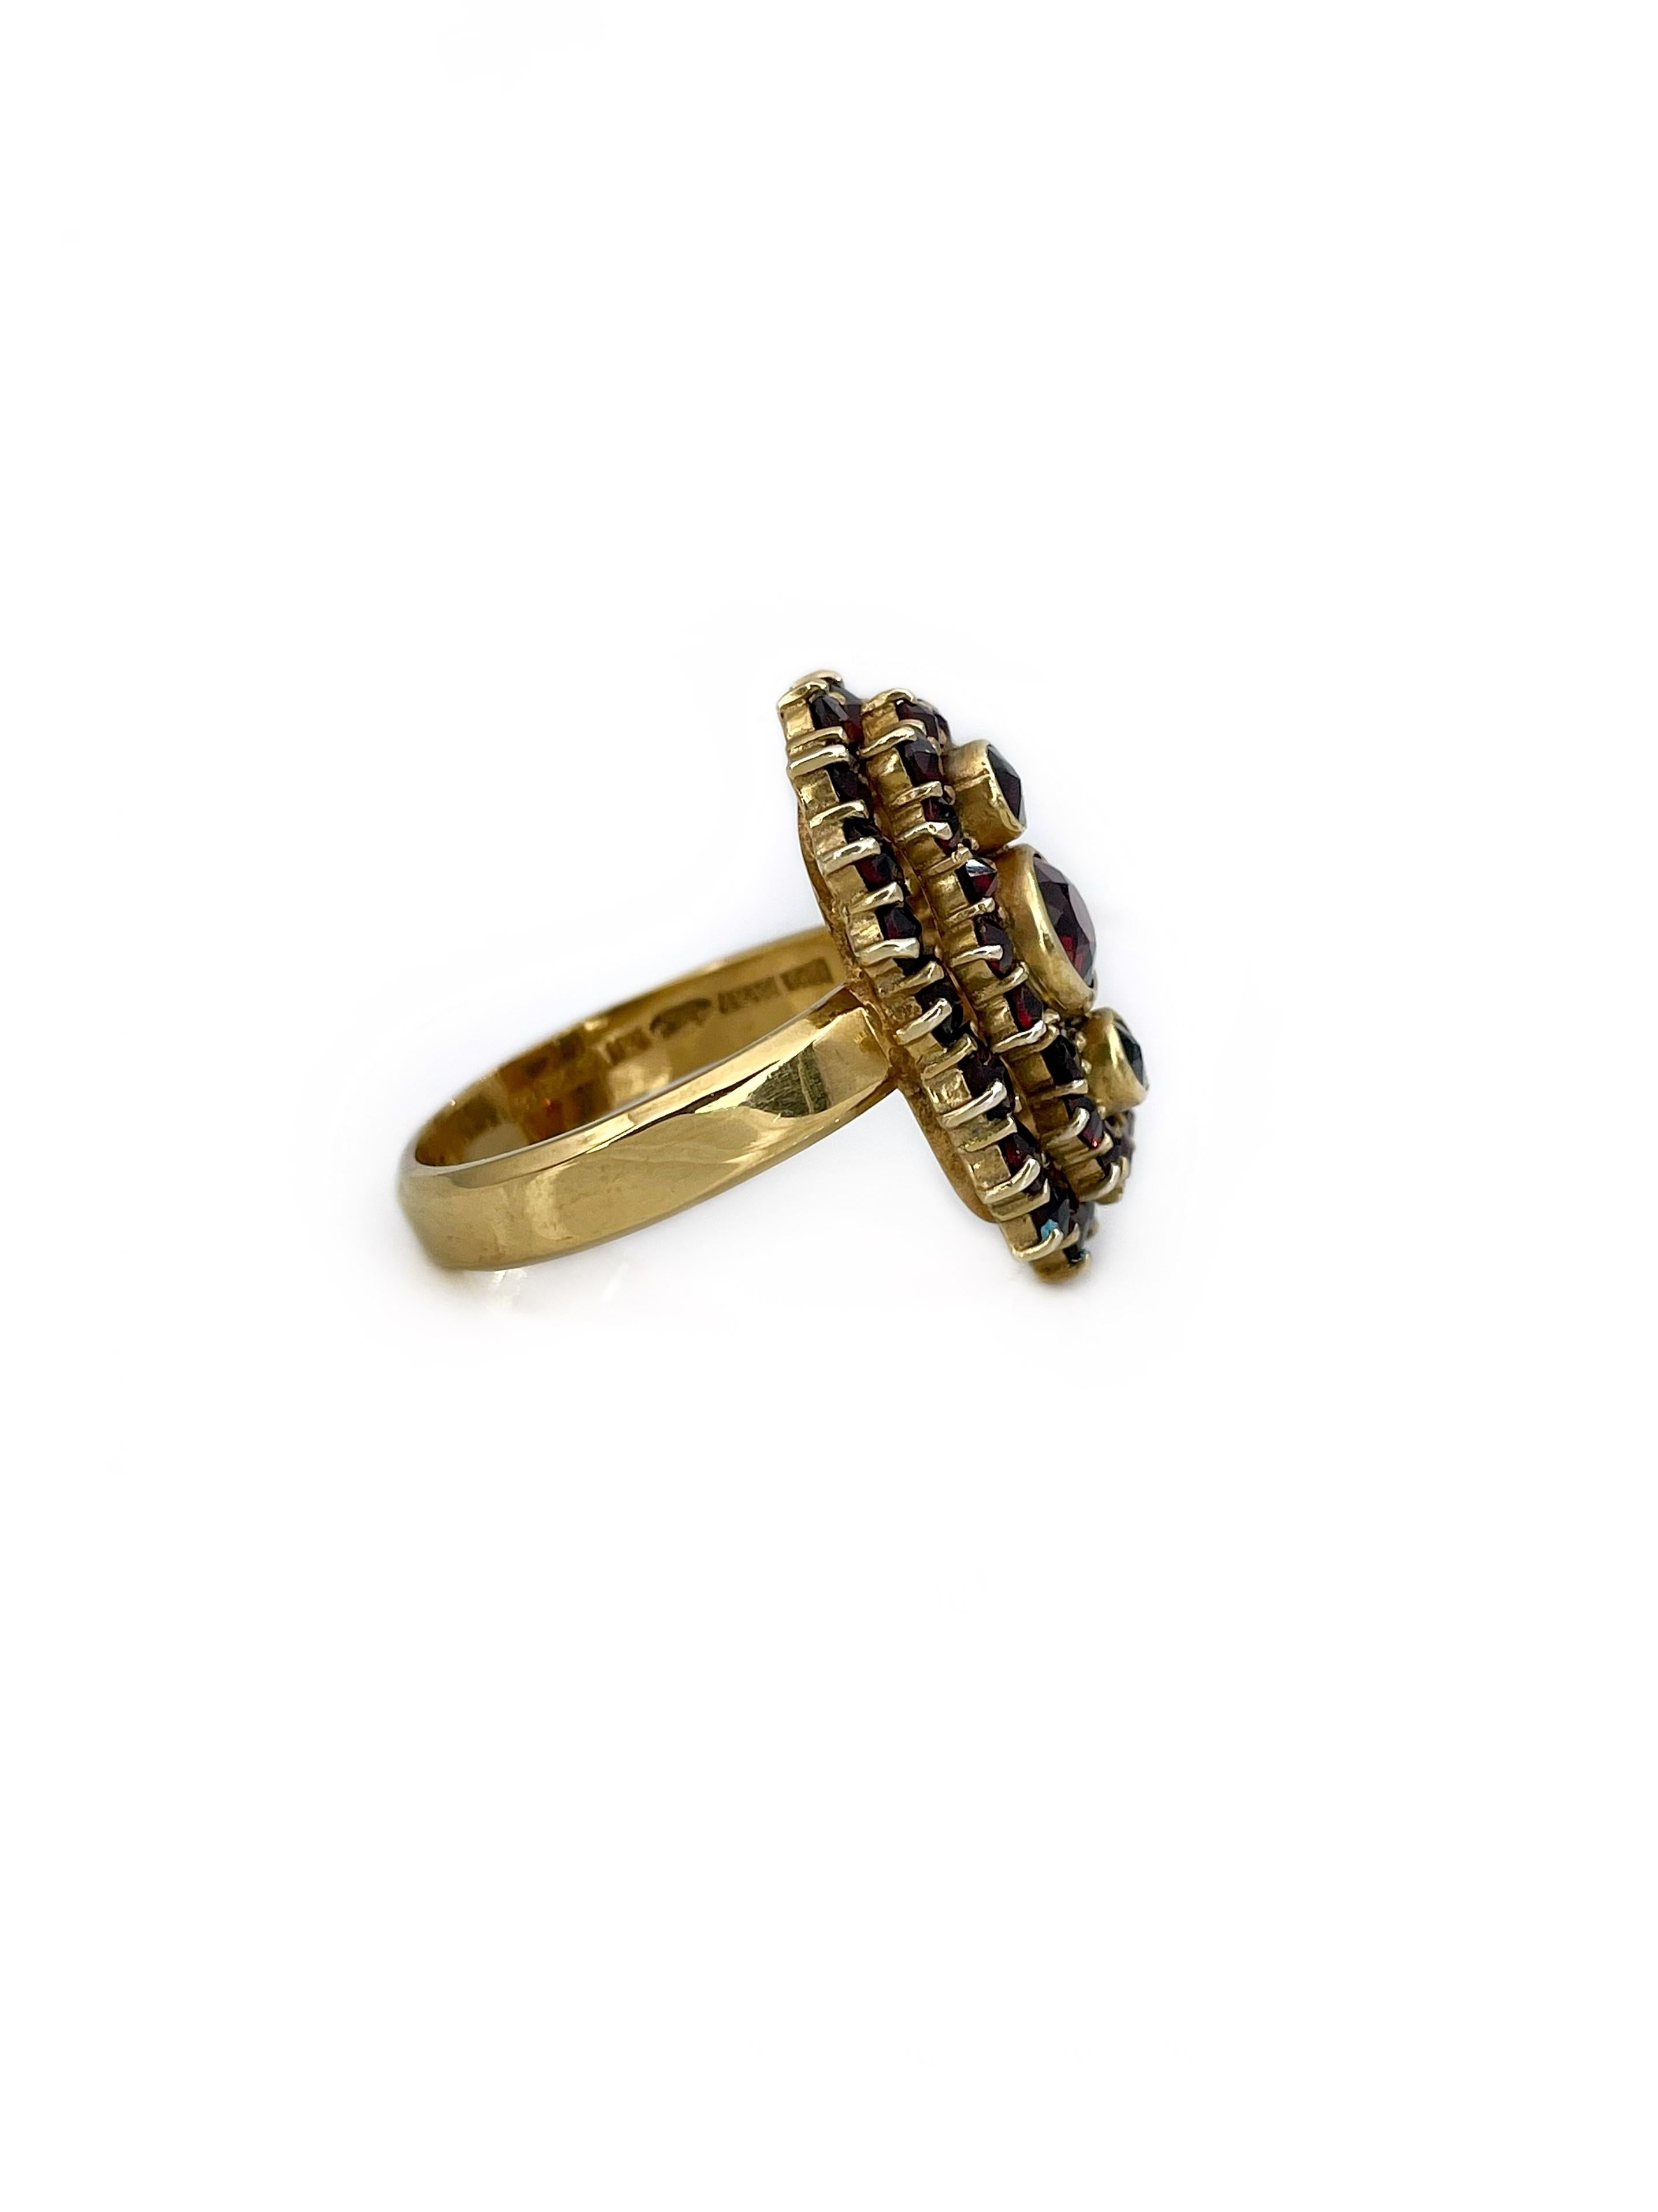 This is a vintage vertical cocktail ring crafted in 18K gold (shank) and 925 fine silver (head). The piece features beautiful red colour garnets. 

Weight: 8.43g
Size: 18.75 (US 8.5)

IMPORTANT: please ask about the possibility to resize before